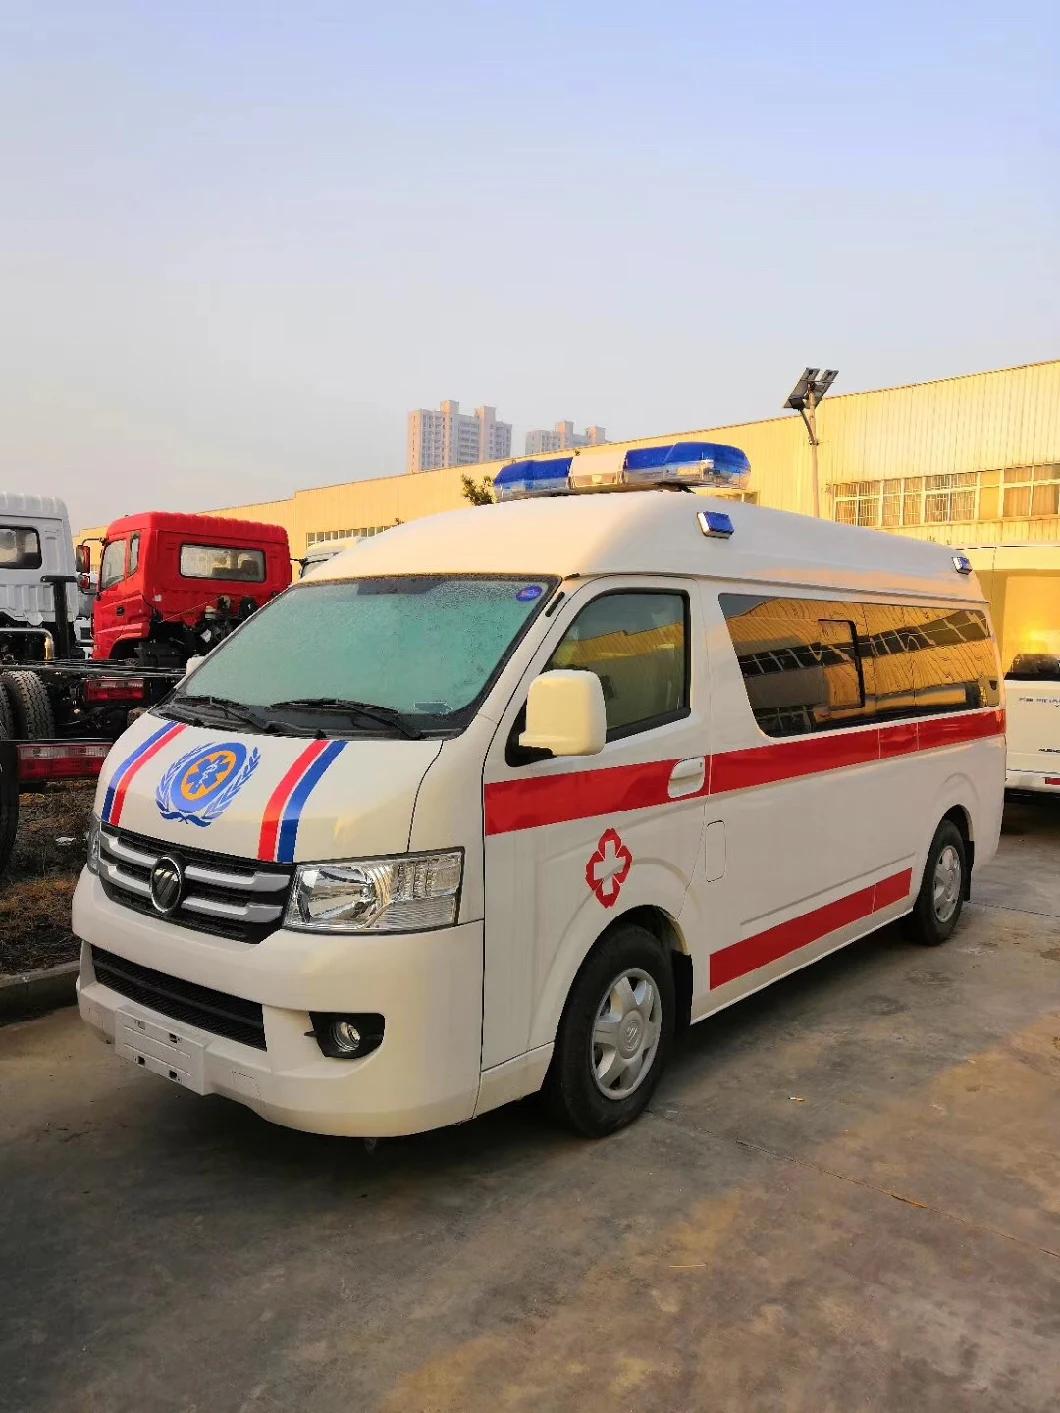 Good Quality Brand New Foton Dongfeng 4X2 Ambulance Patient Monitor Diesel Ambulance Vehicle with Folding Stretcher